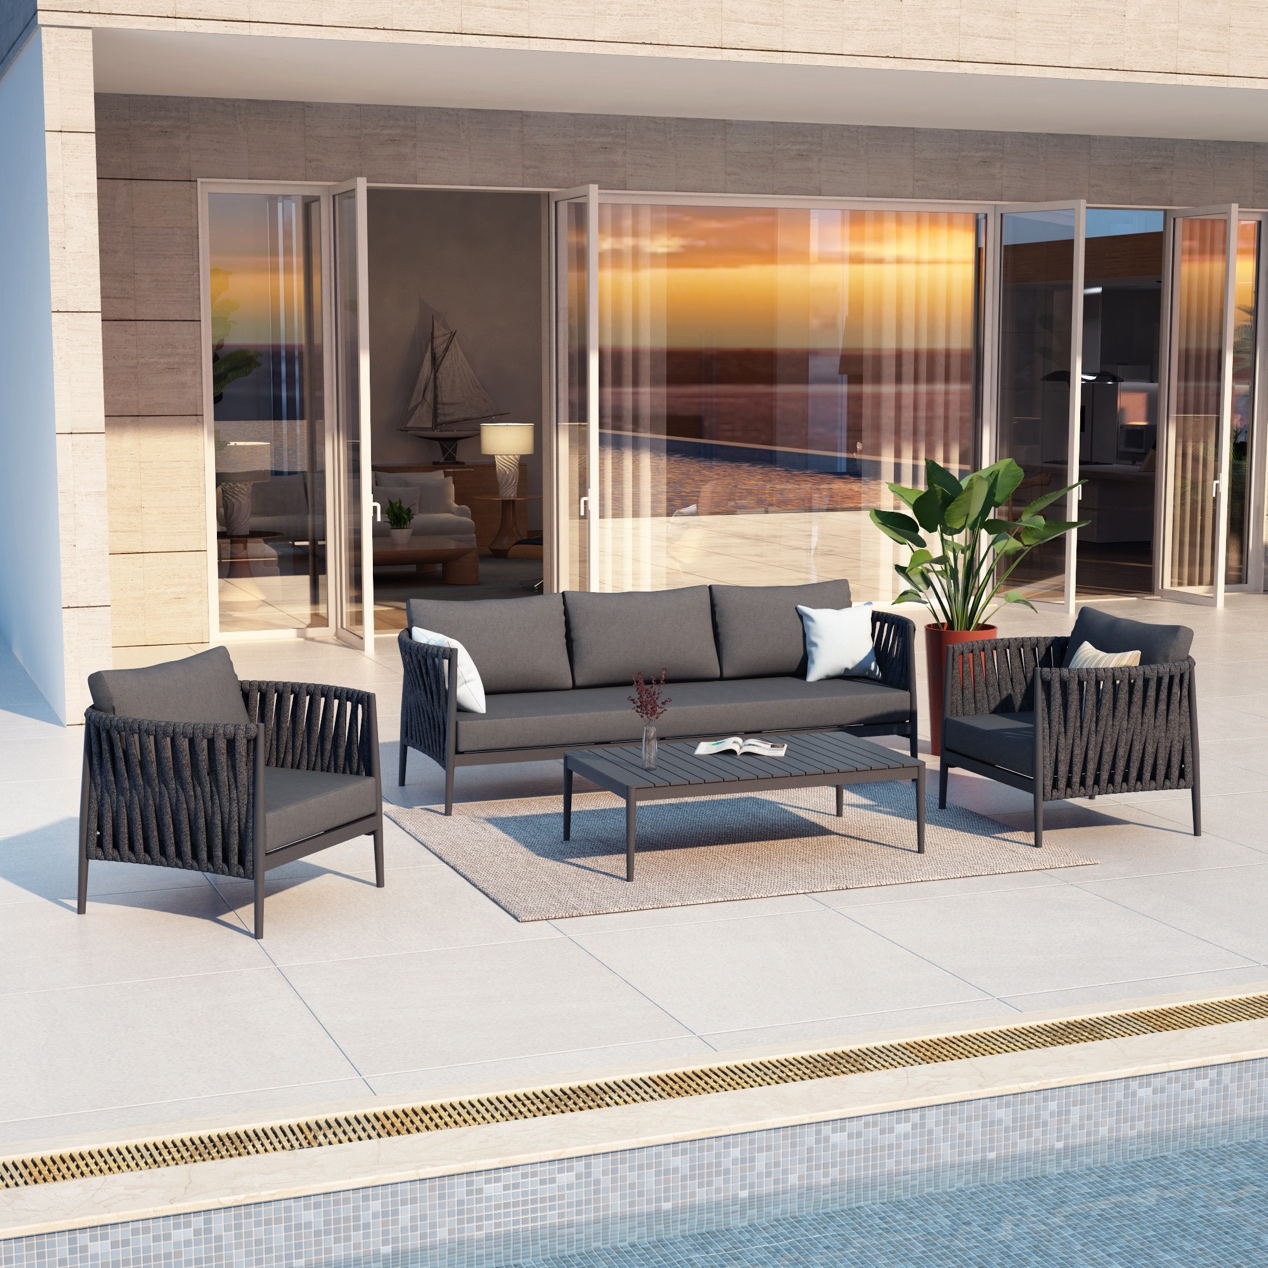 Baeryon Introduces a Patio Couch Set that Can Withstand Any Weather Conditions.